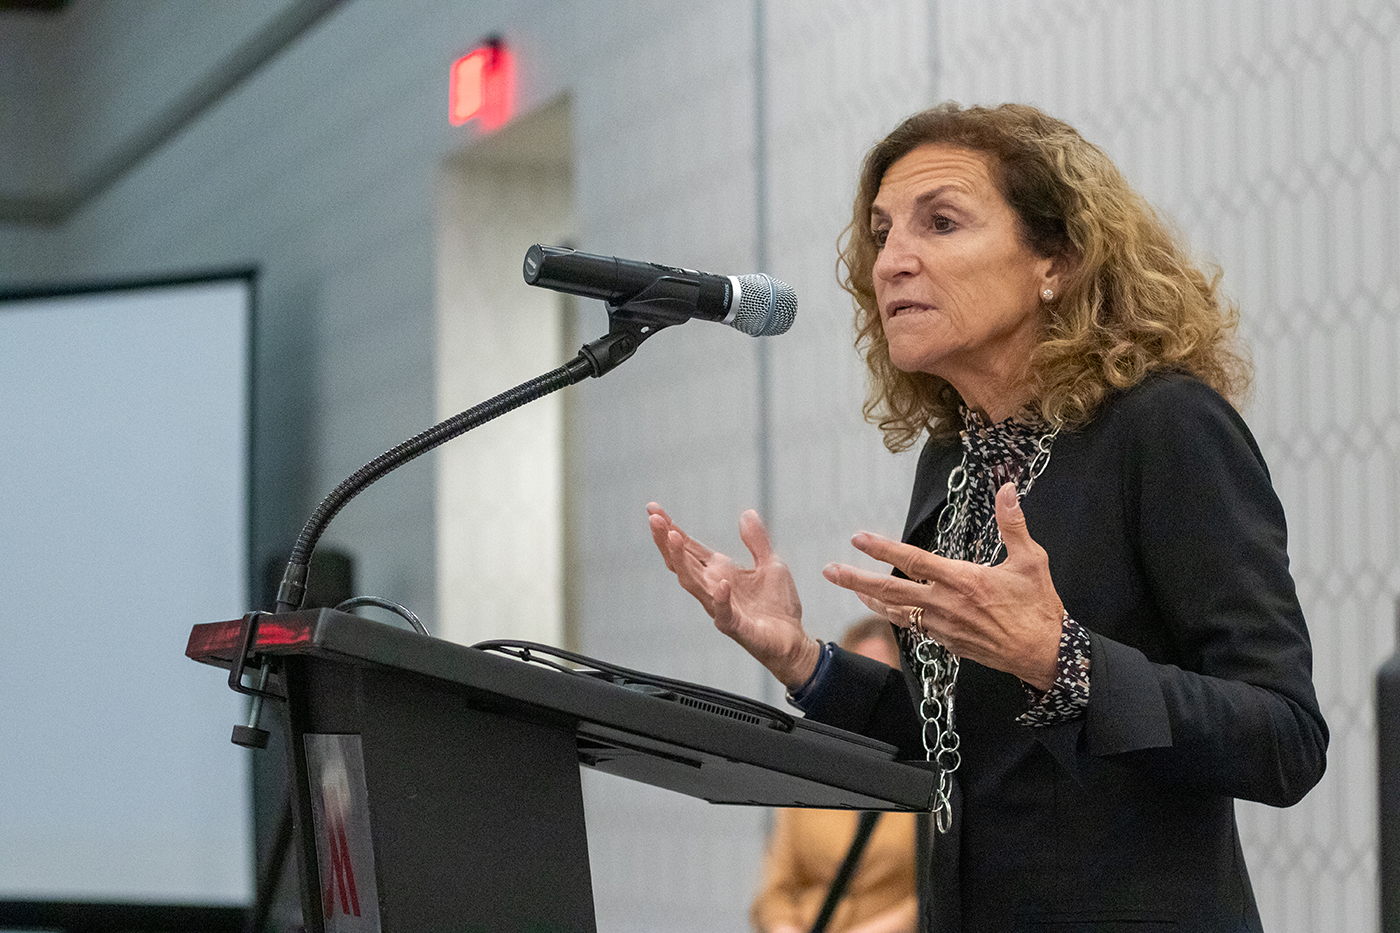 Tanny Crane, president and CEO of Crane Group, speaks at the 2023 Symposium on Chlldren. Crane stands behind a podium, speaking into a microphone attached to the podium. Crane holds her hands outward, with arms bent at the elbows, as she speaks.